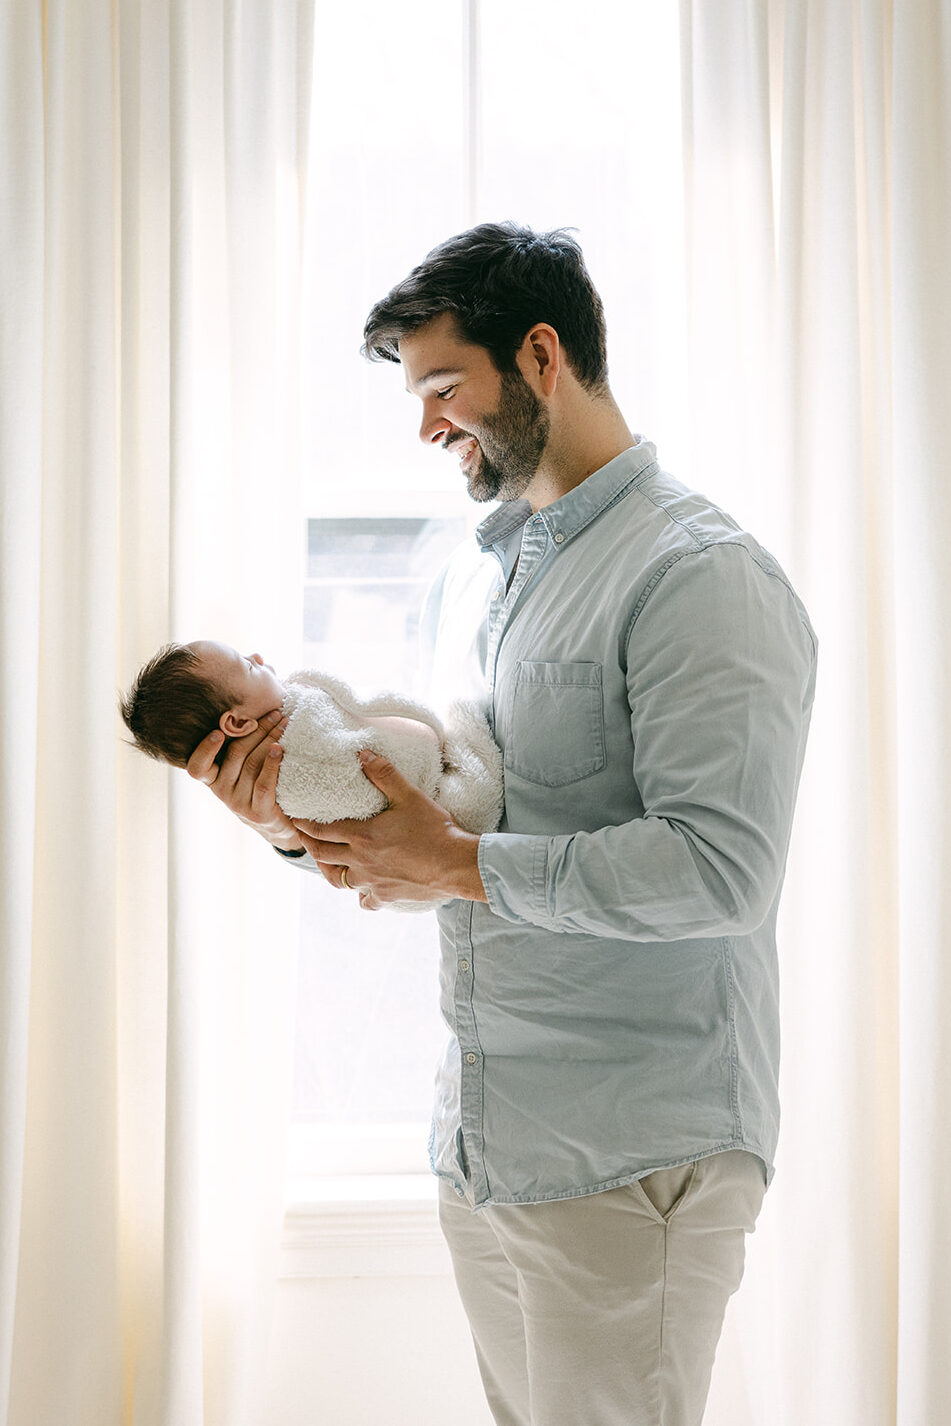 Dad is standing in front of a window with flow-y drapes and holding his newborn son out in front of him and smiling at him. 